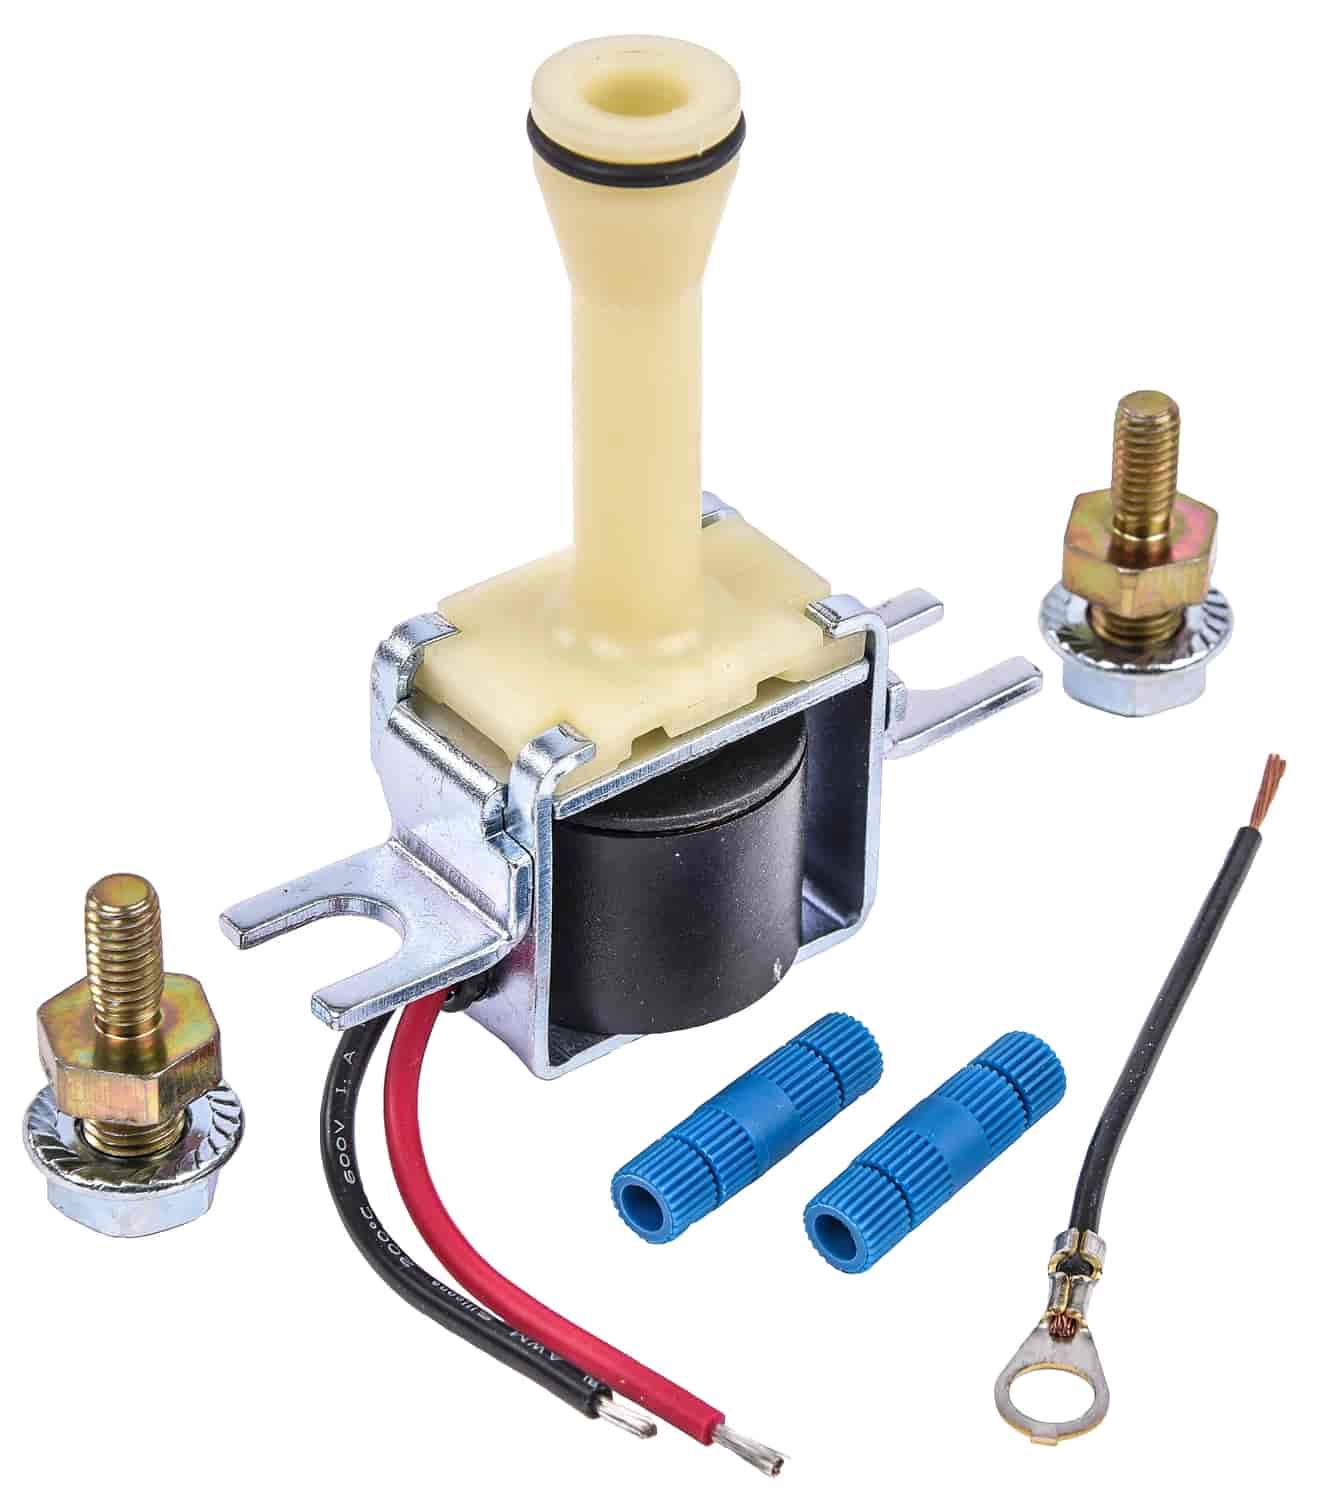 Lock-Up Solenoid Replacement for GM 700-R4, 200-4R, and 4L60E  [2-Wire TCC]